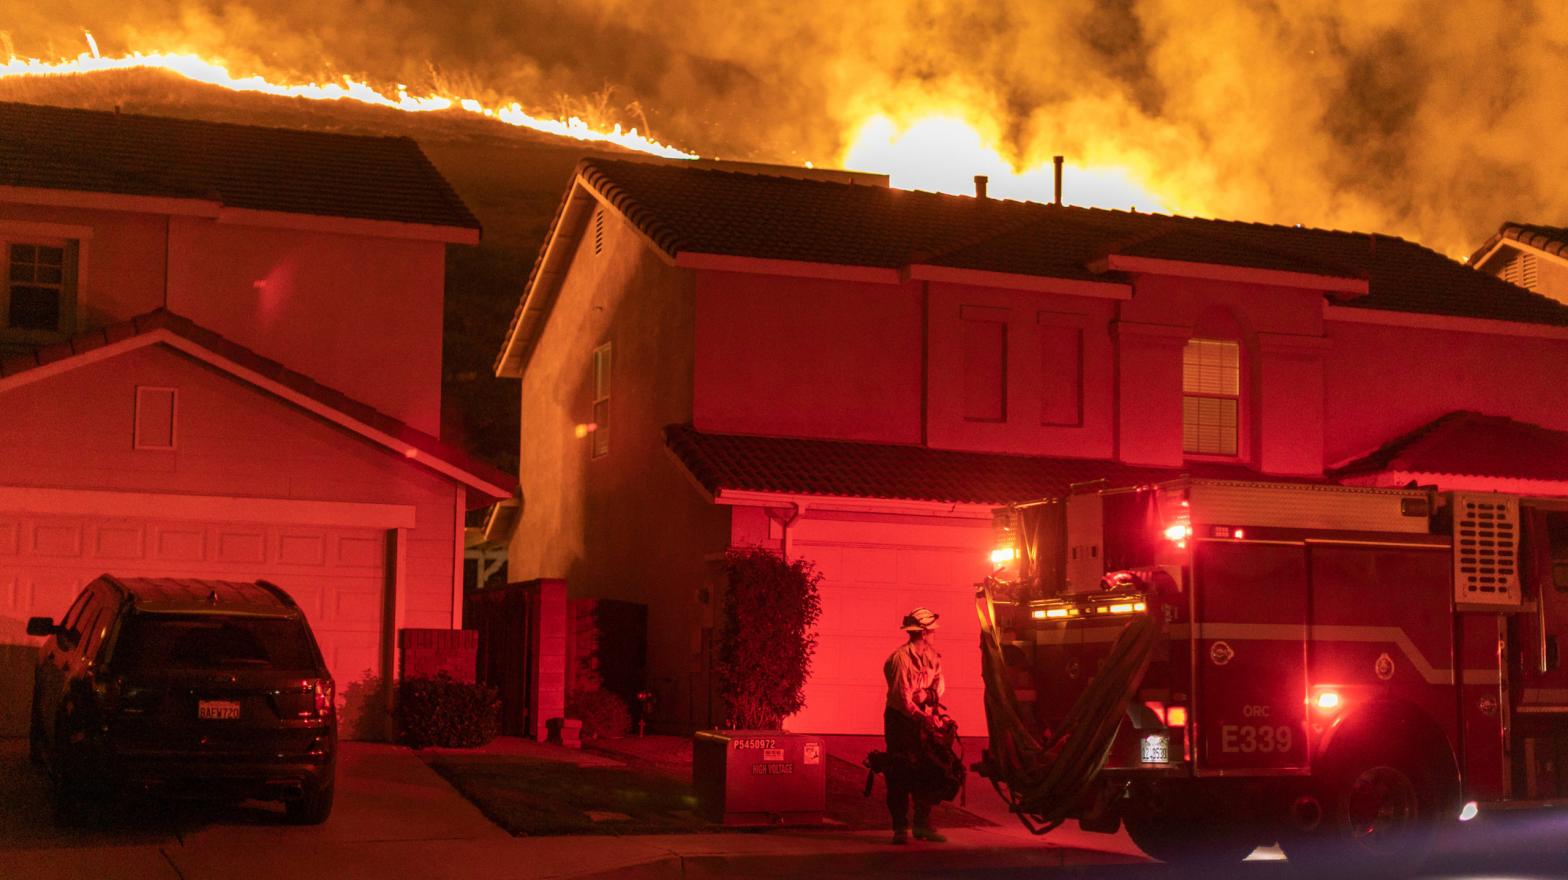 Flames come close to houses during the Blue Ridge Fire on Oct. 27, 2020 in Chino Hills, California.  (Photo: David McNew, Getty Images)